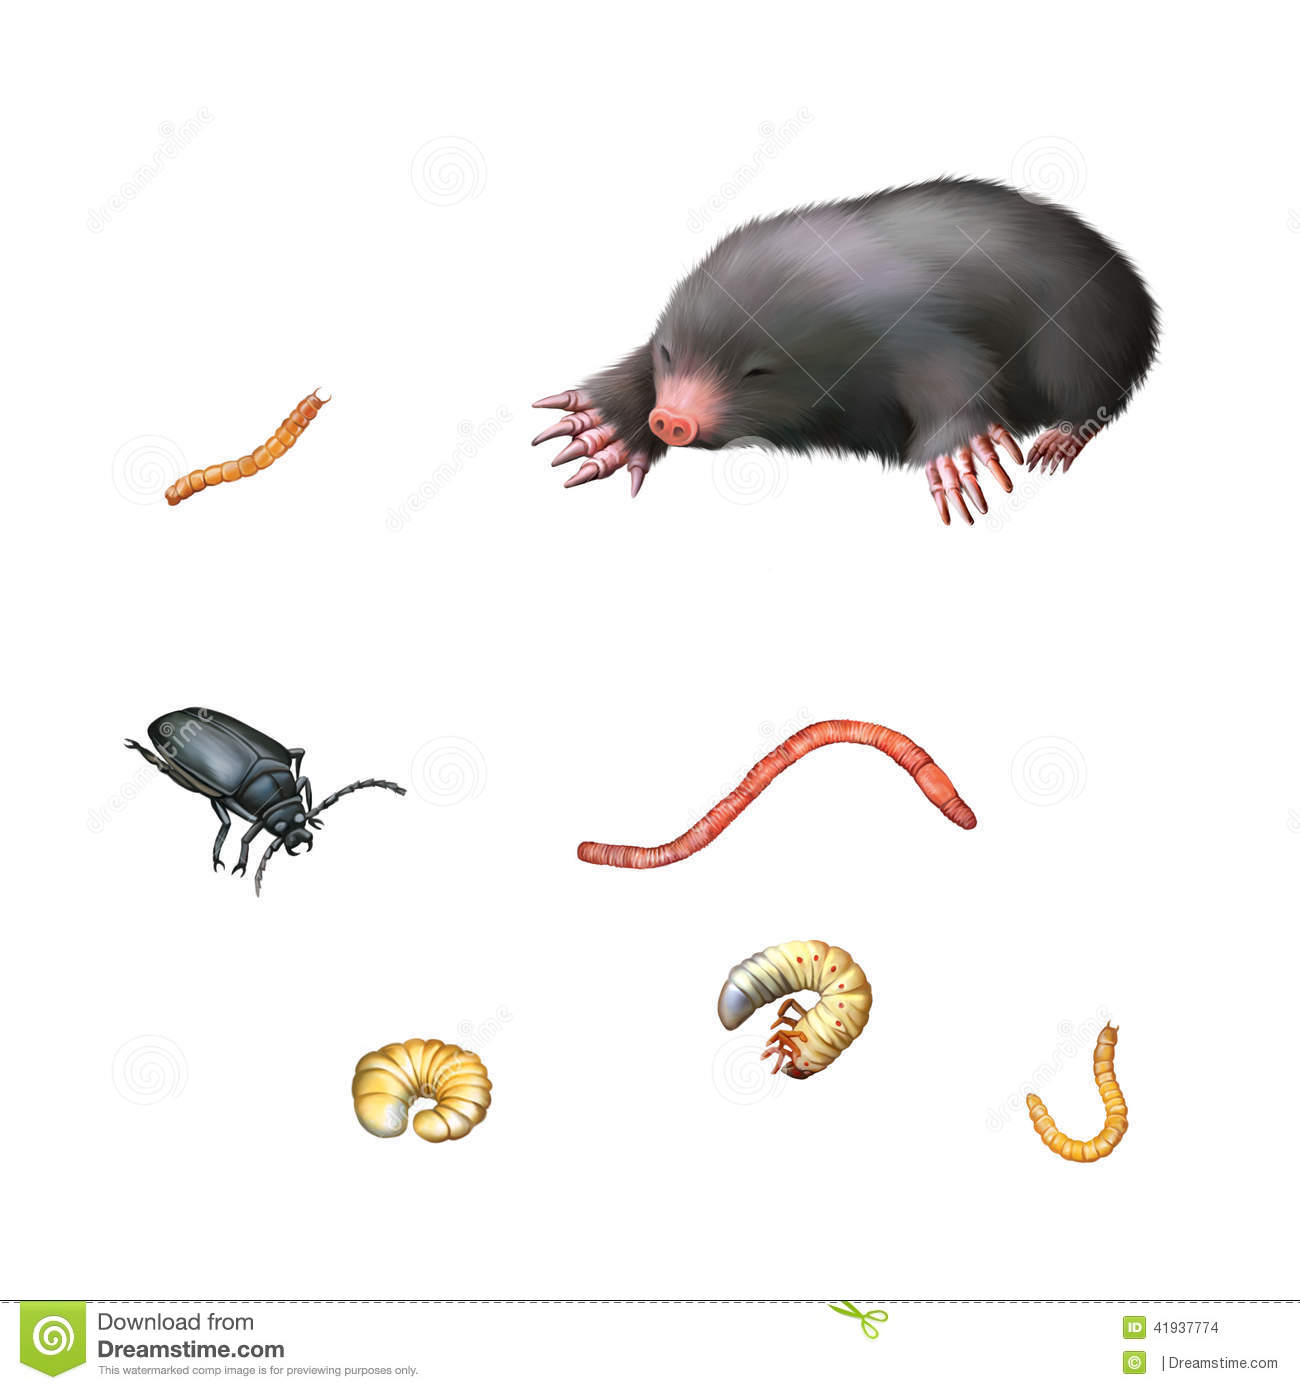 Mole Black Beetle Larvae And Worms Isolated On A White Background